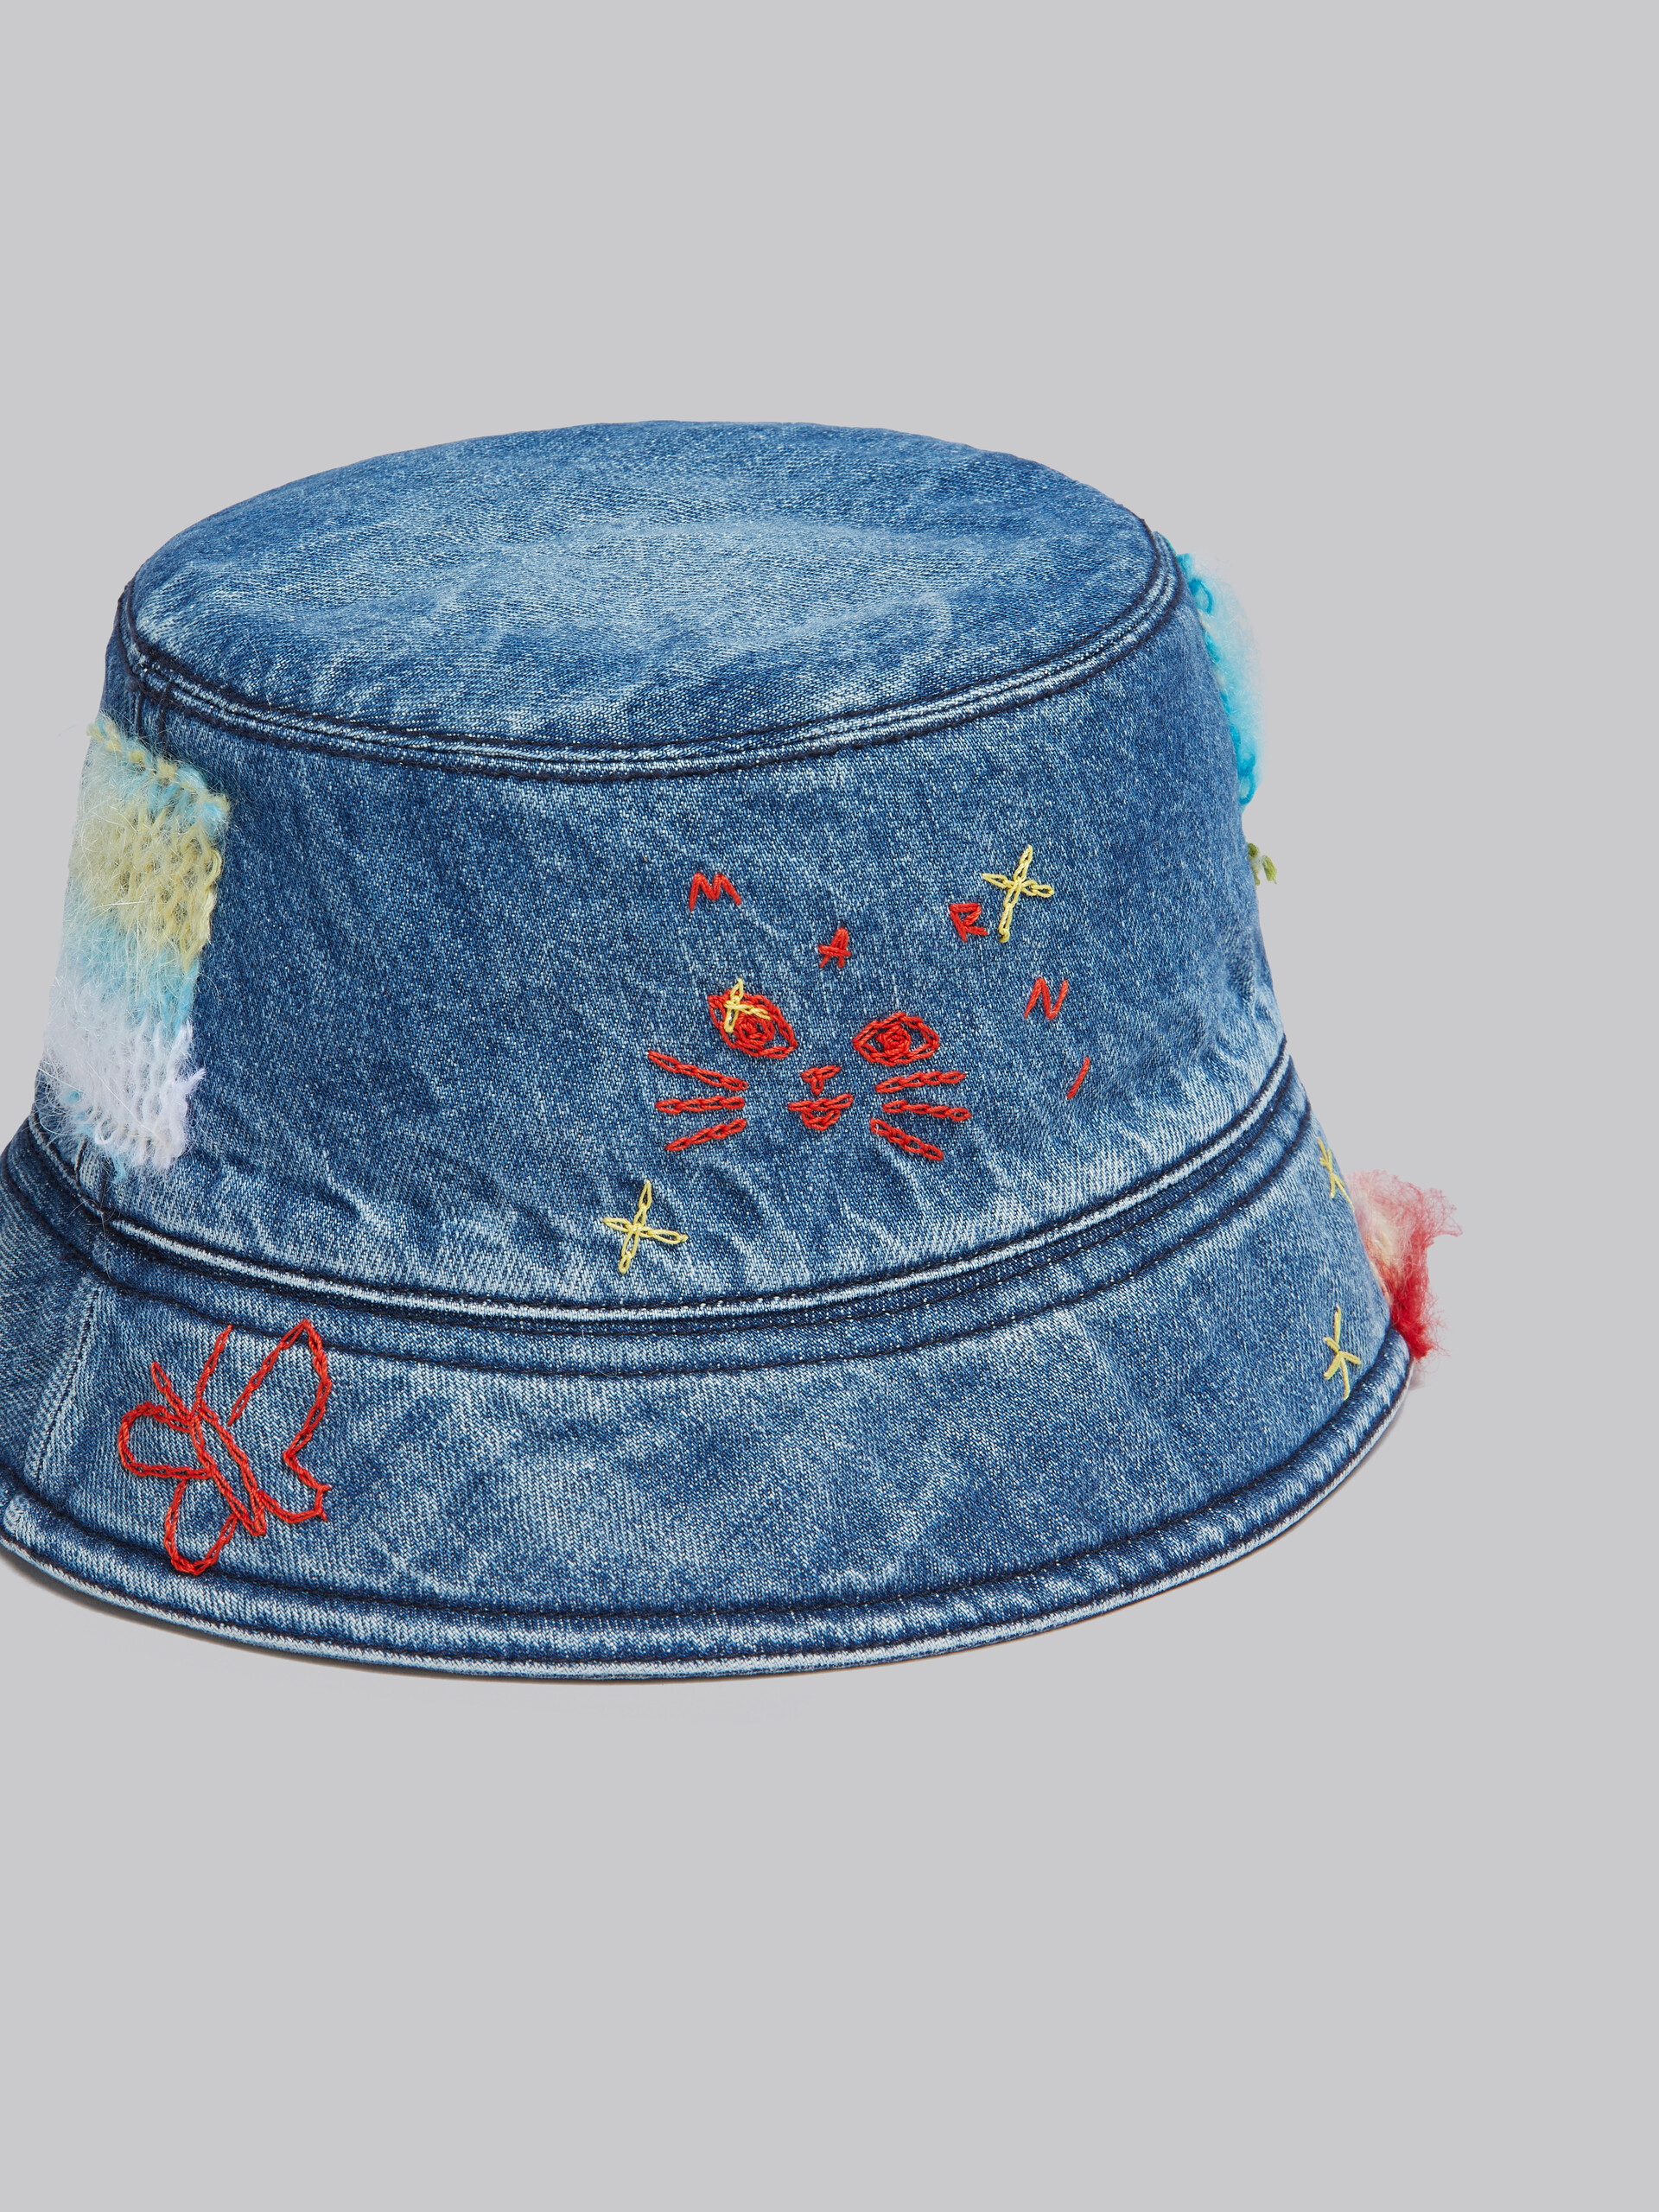 Blue organic denim bucket hat with mohair patches - Hats - Image 4